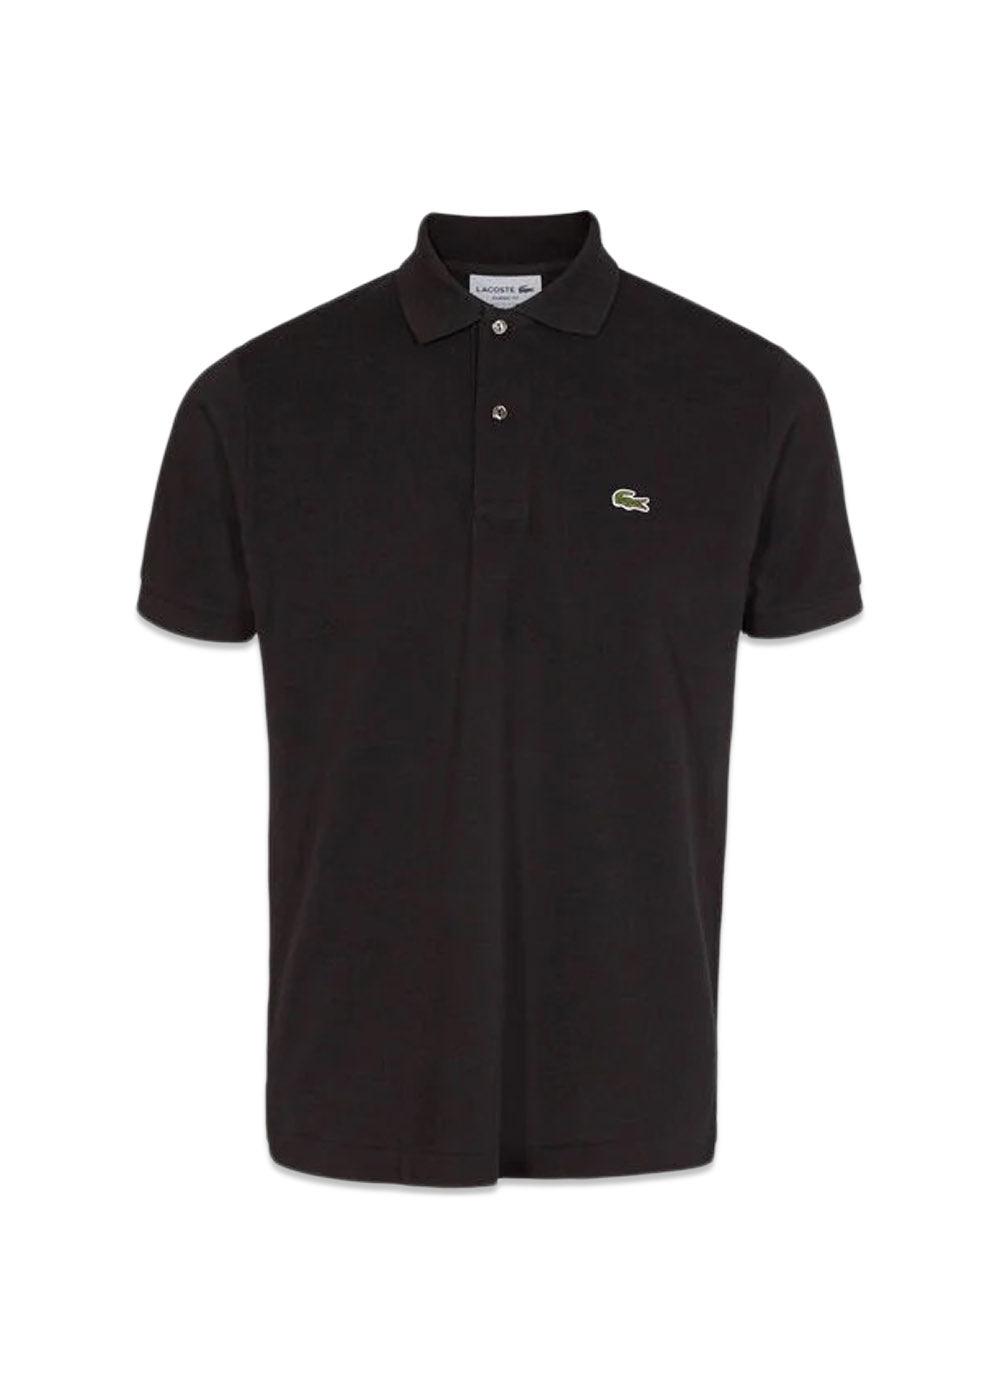 Classic Fit Short Sleeved Ribbed Collar - Black